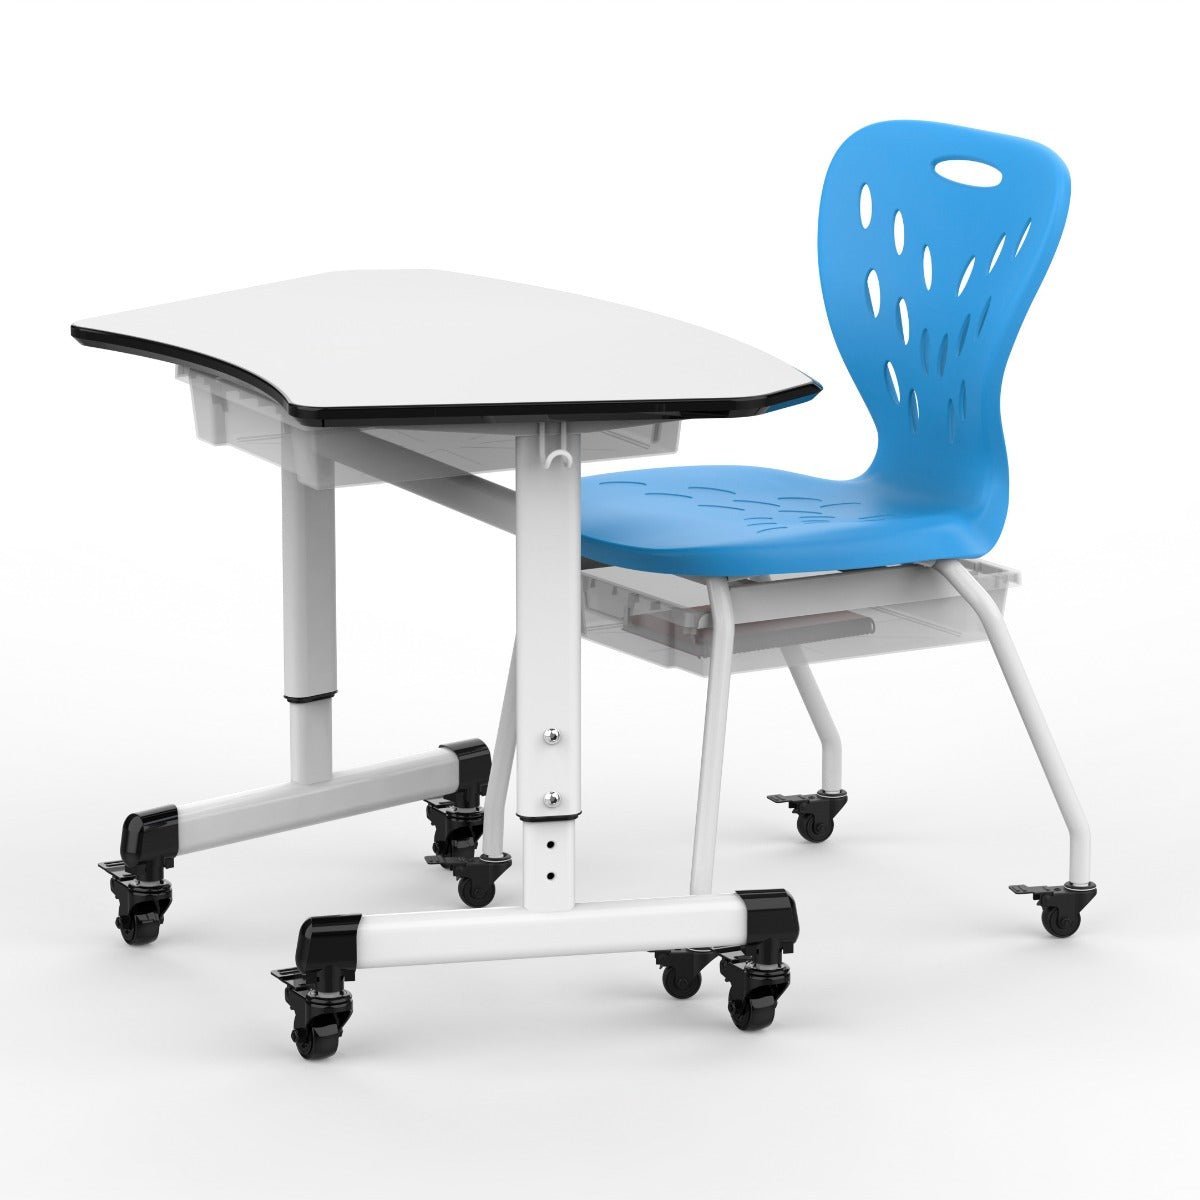 Luxor MBS-CHAIR - Stackable School Chair with Wheels and Storage - 17.25" - Blue (LUX-MBS-CHAIR) - SchoolOutlet